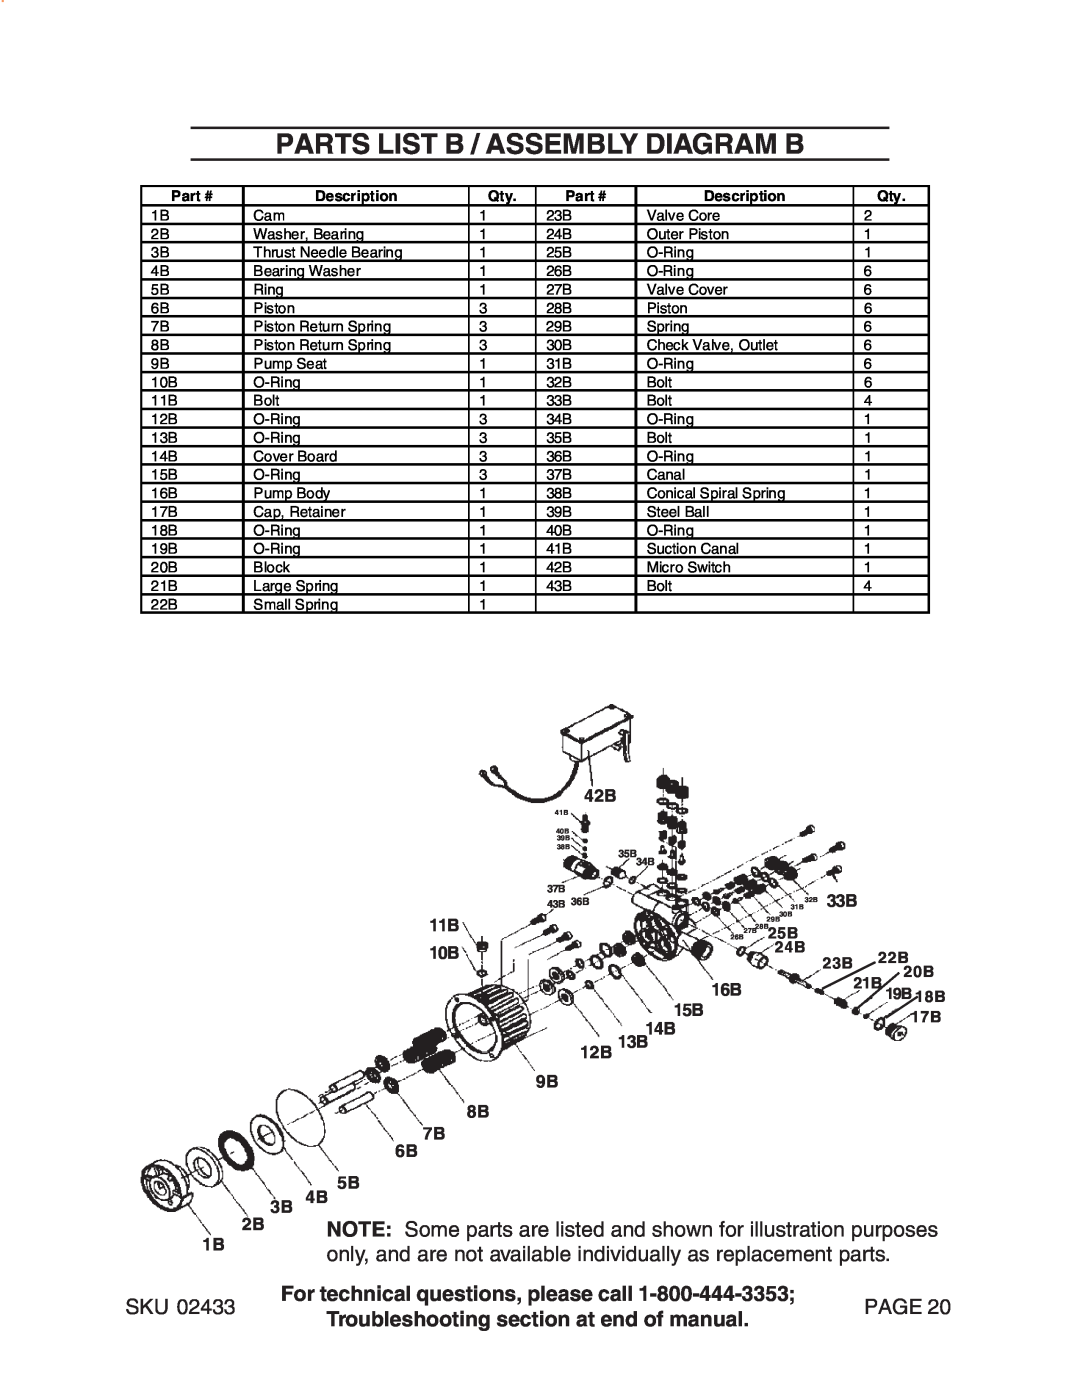 Harbor Freight Tools 2433 manual Parts List B / Assembly Diagram B, For technical questions, please call, Page 